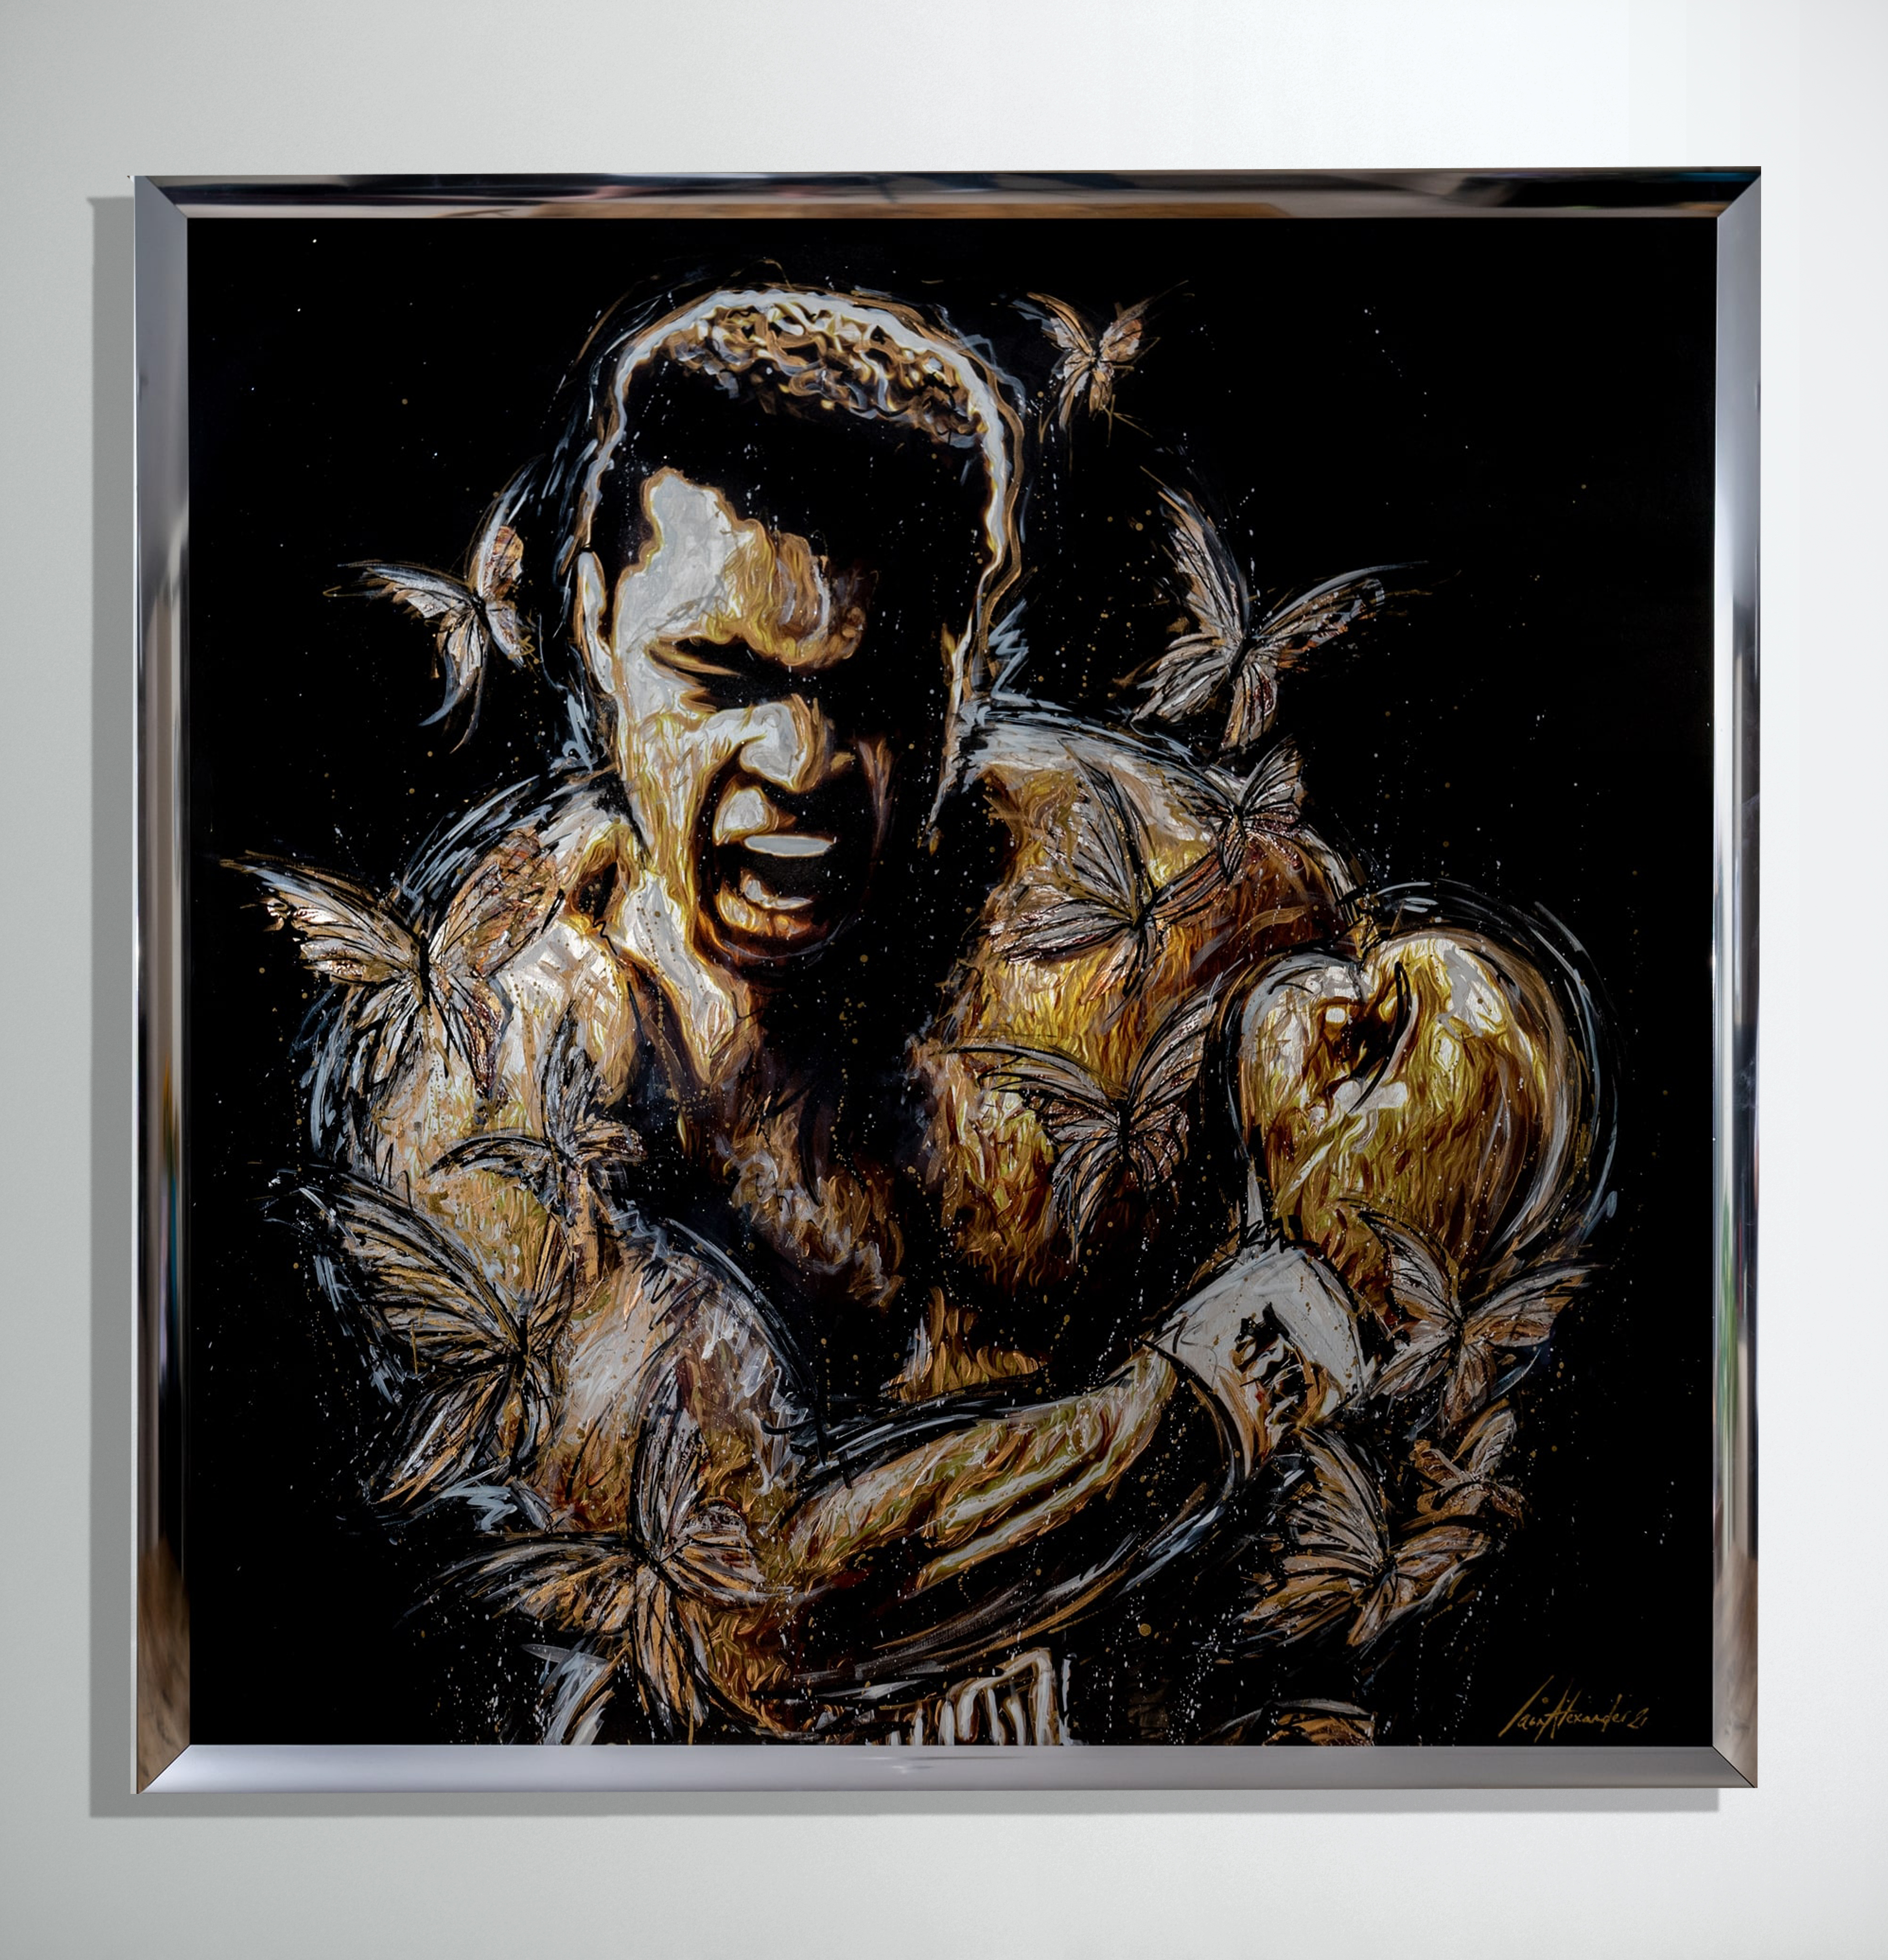 Ali Sting Like a Butterfly by Iain Alexander | Limited Ediiton